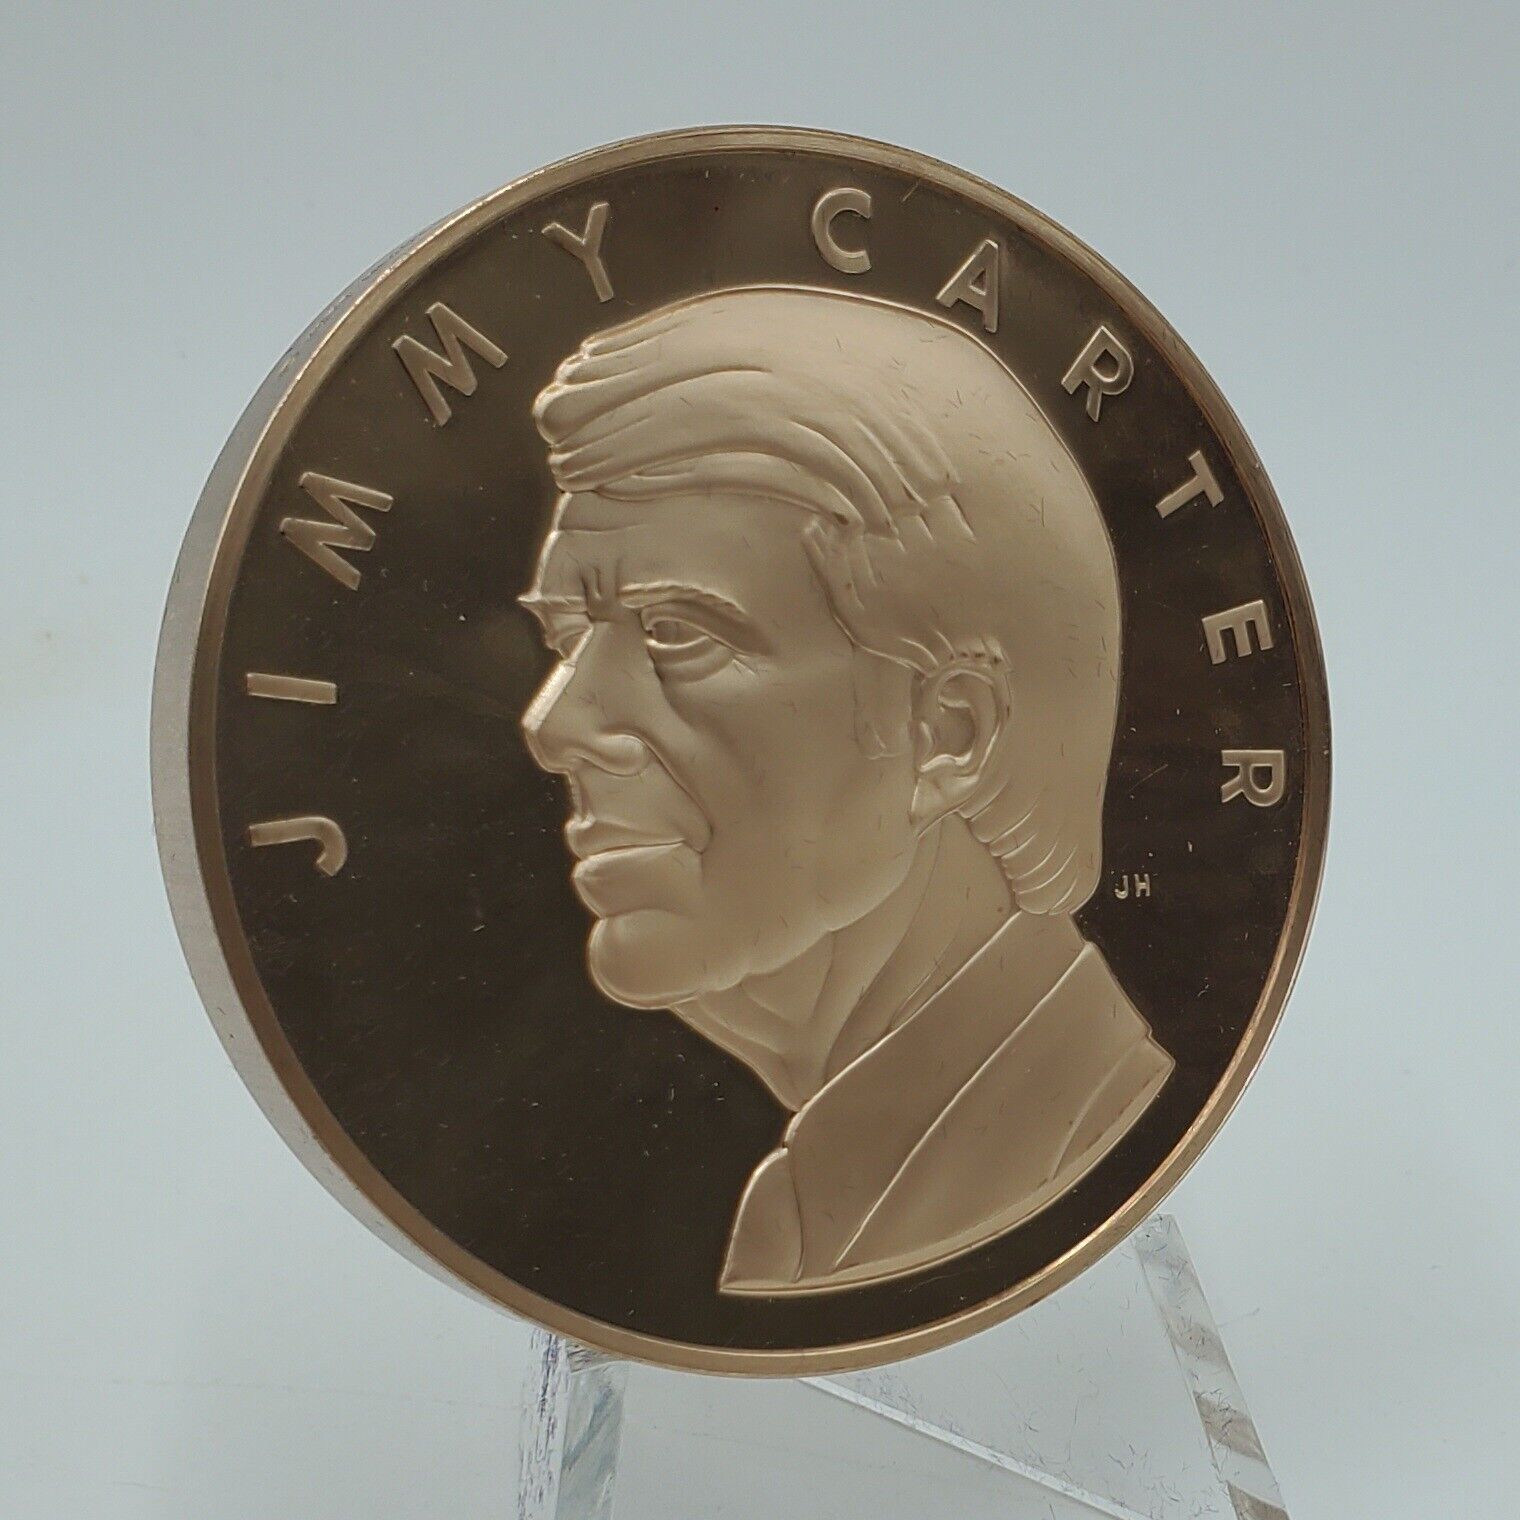 Jimmy Carter 1977 Presidential Inaugural Medal in Proof Bronze Franklin Mint